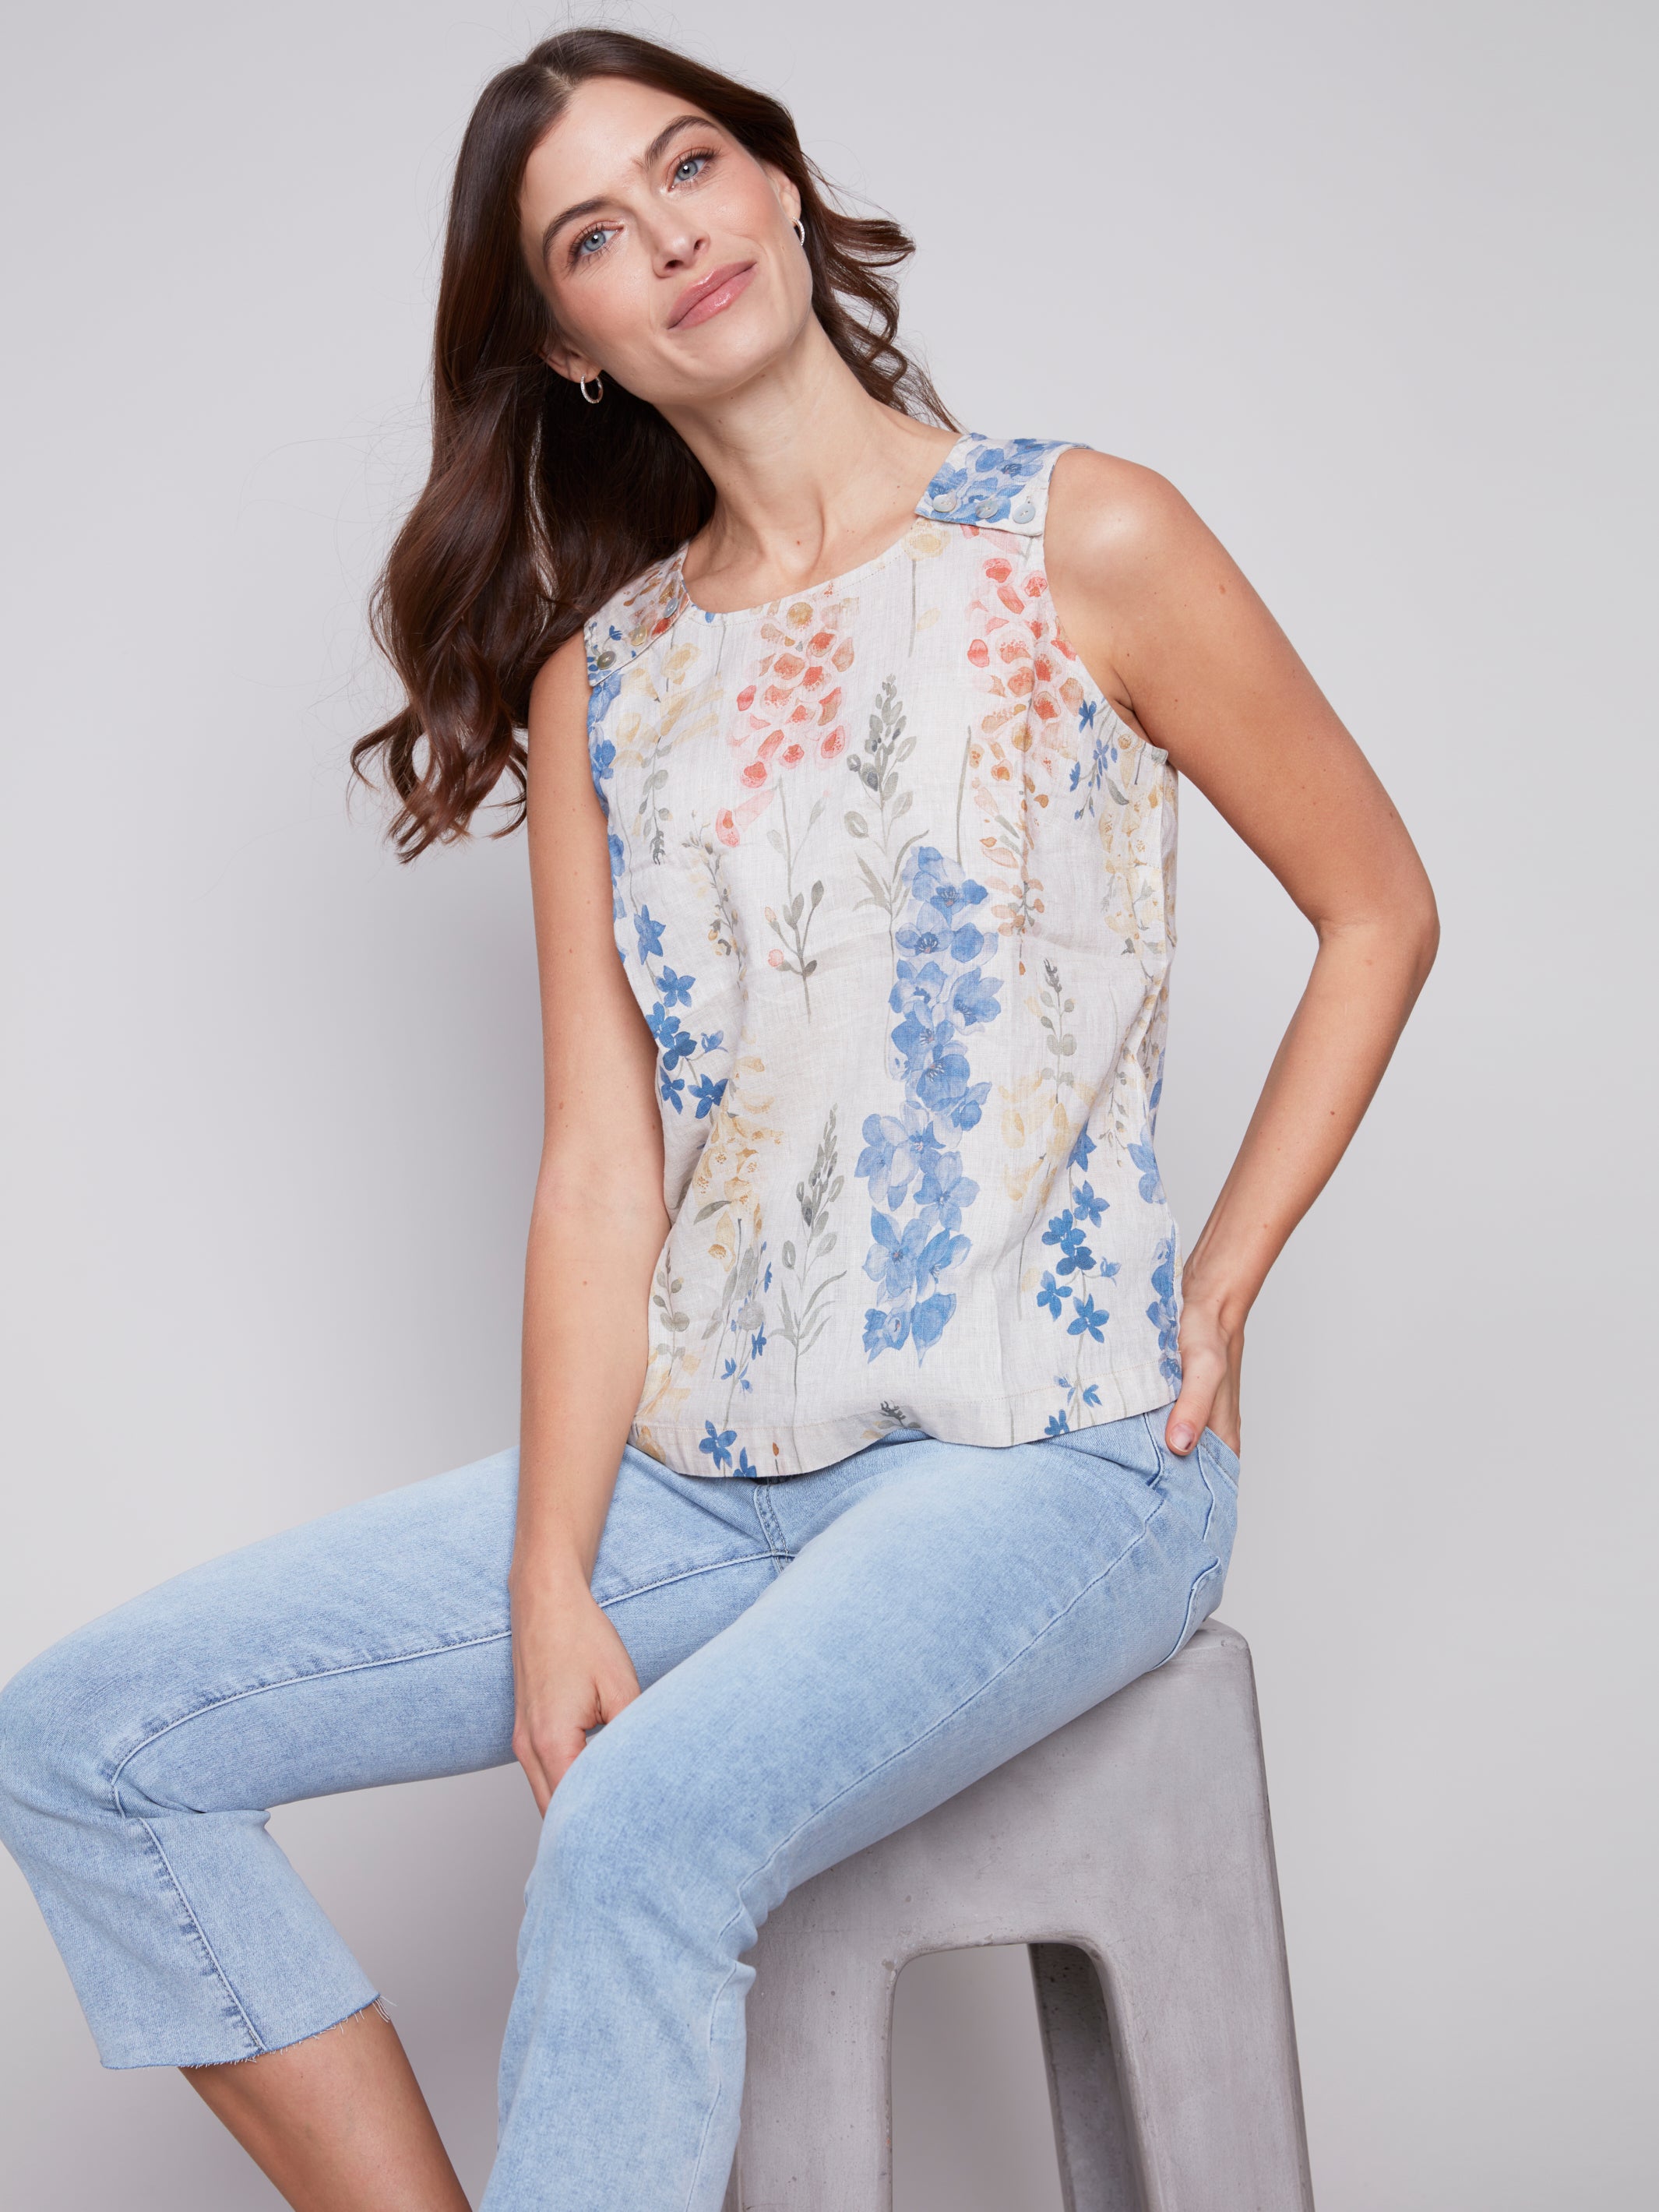 Garden Print Sleeveless Linen Top with Button Detail by Charlie B